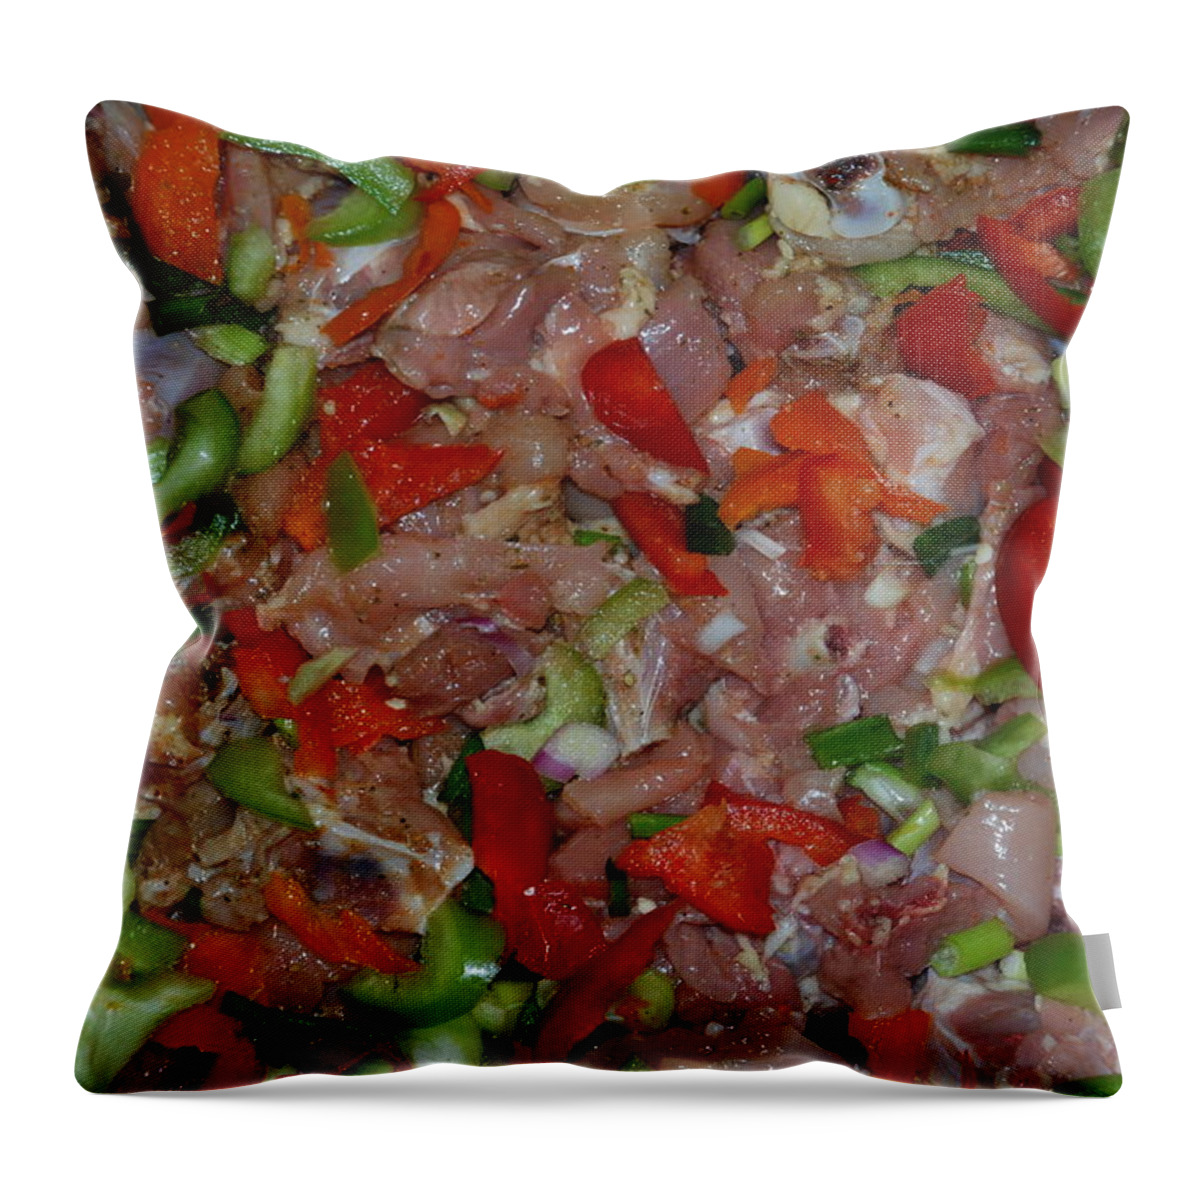 Marinade Throw Pillow featuring the photograph Chicken Marinade by Ee Photography